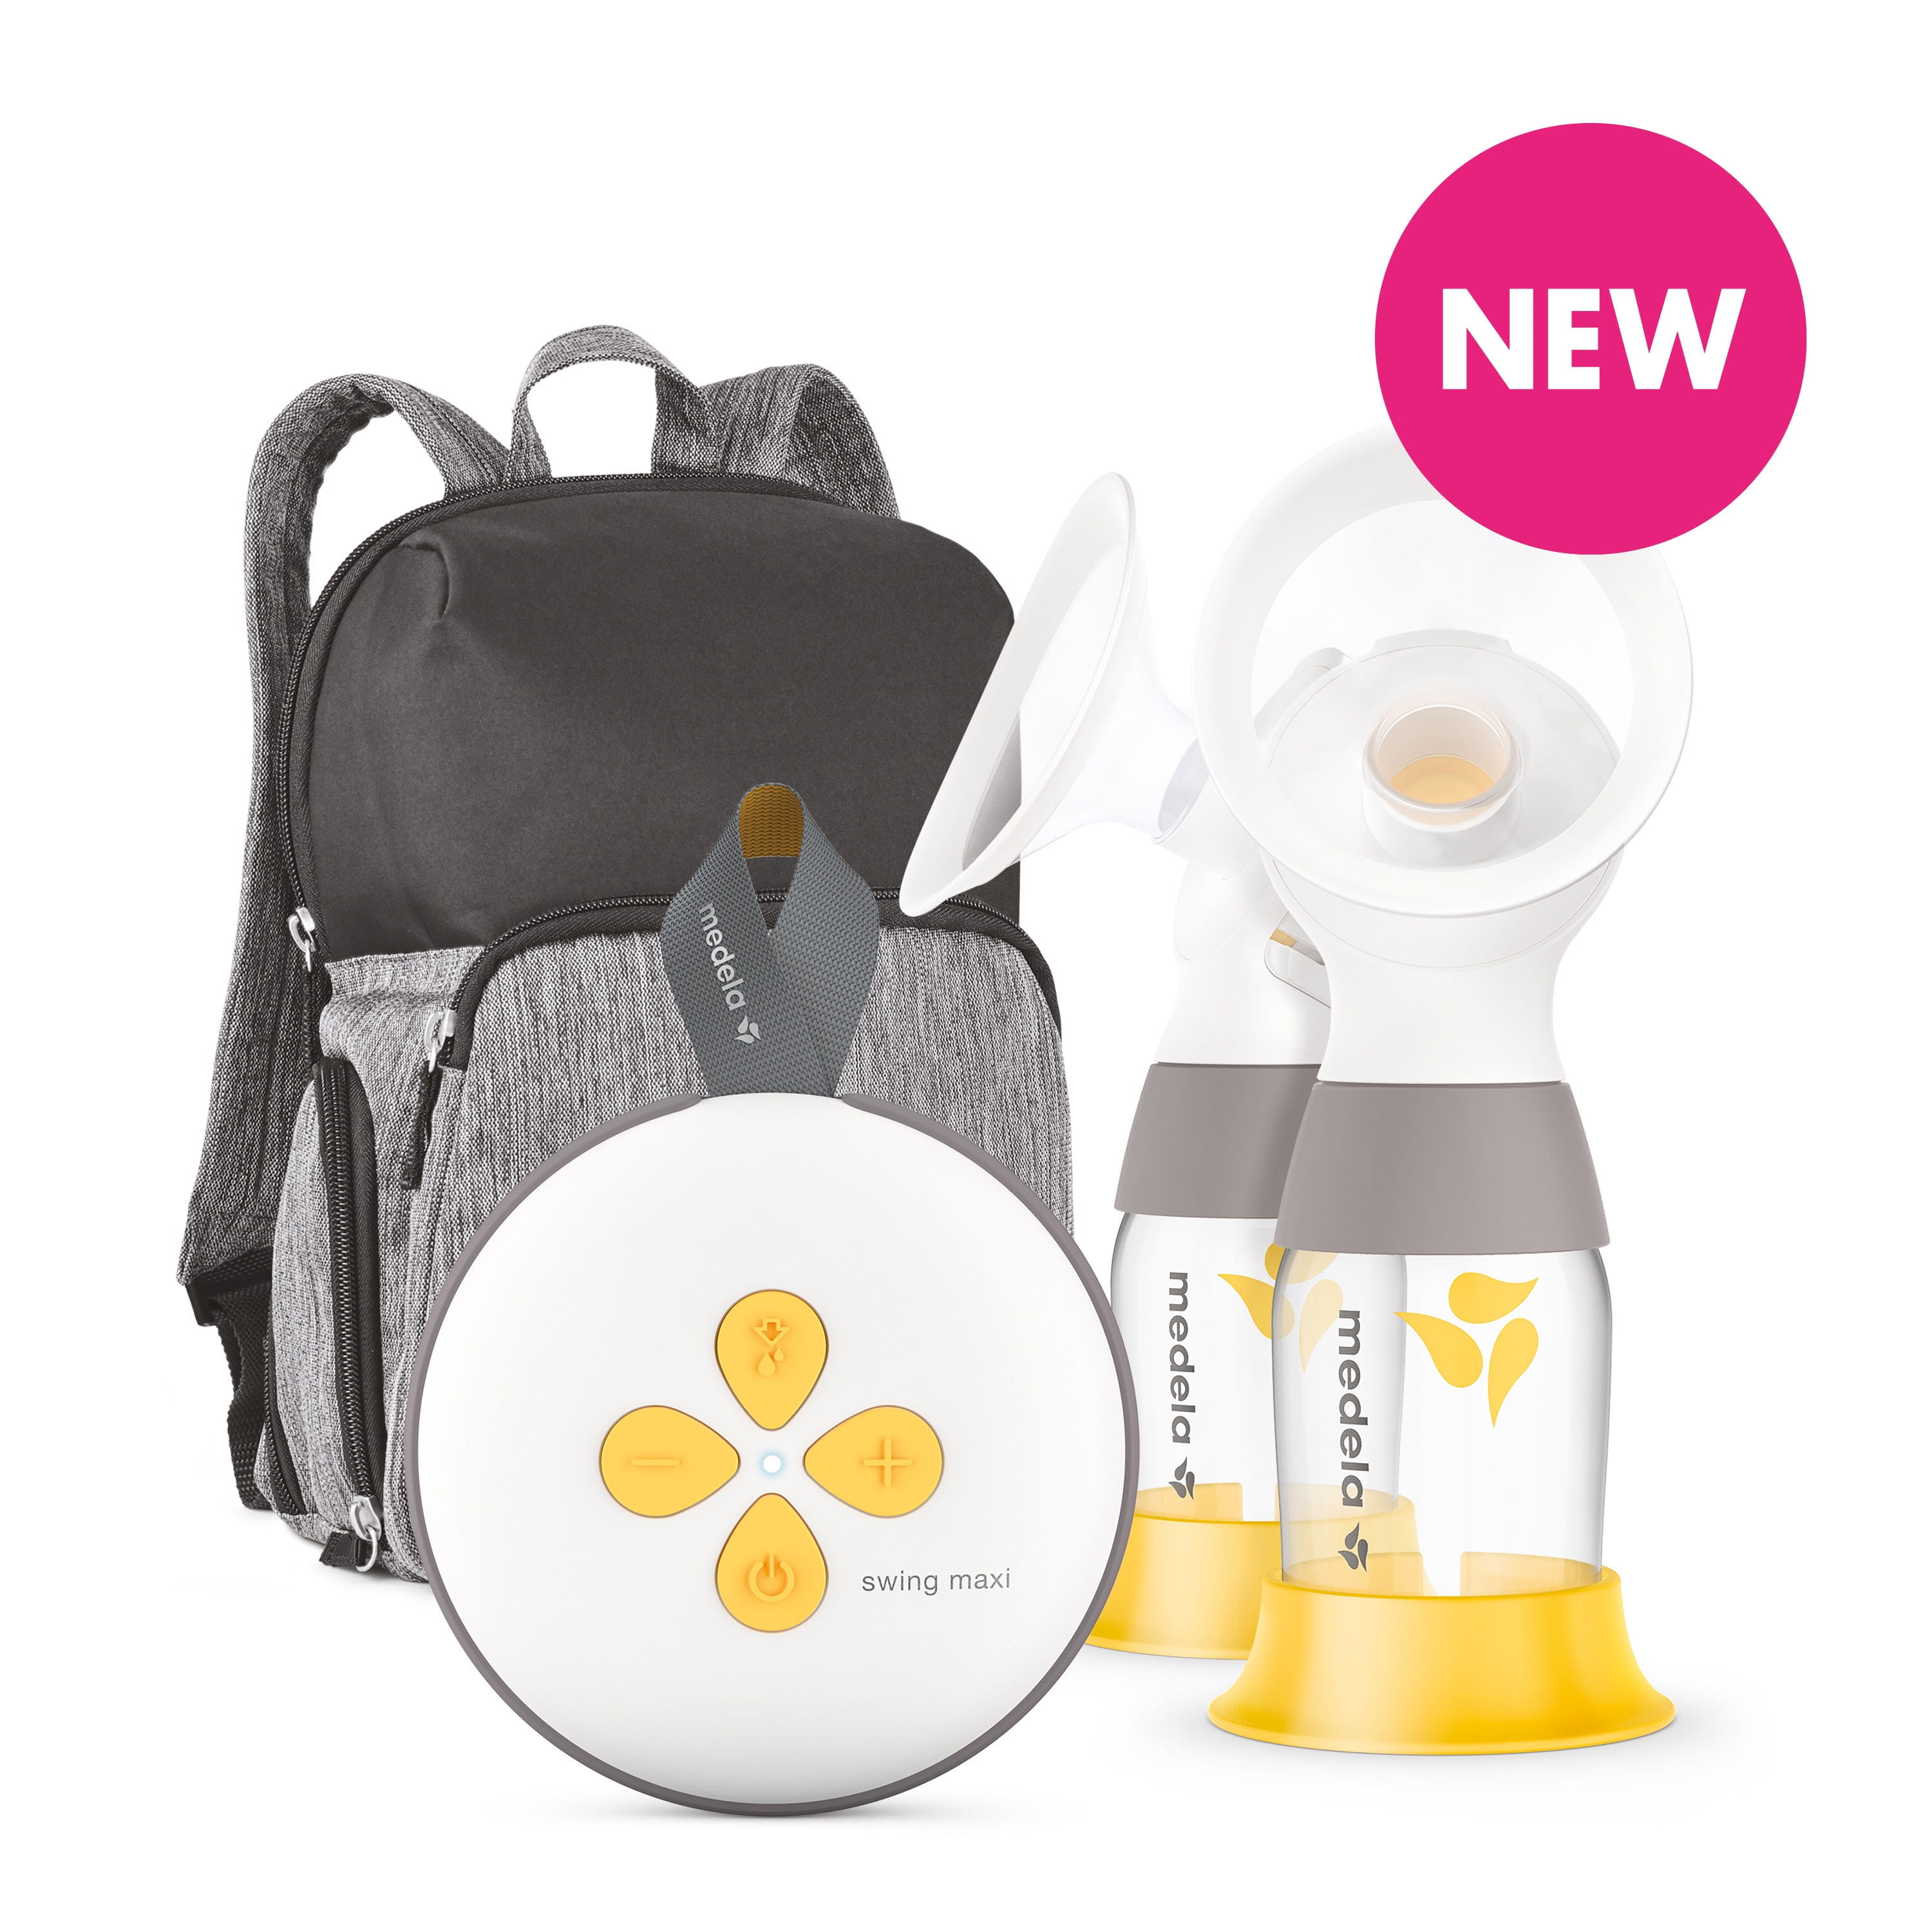 Medela NEW Swing Maxi Double Electric Breast Pump, Portable, USB Charger, Bluetooth